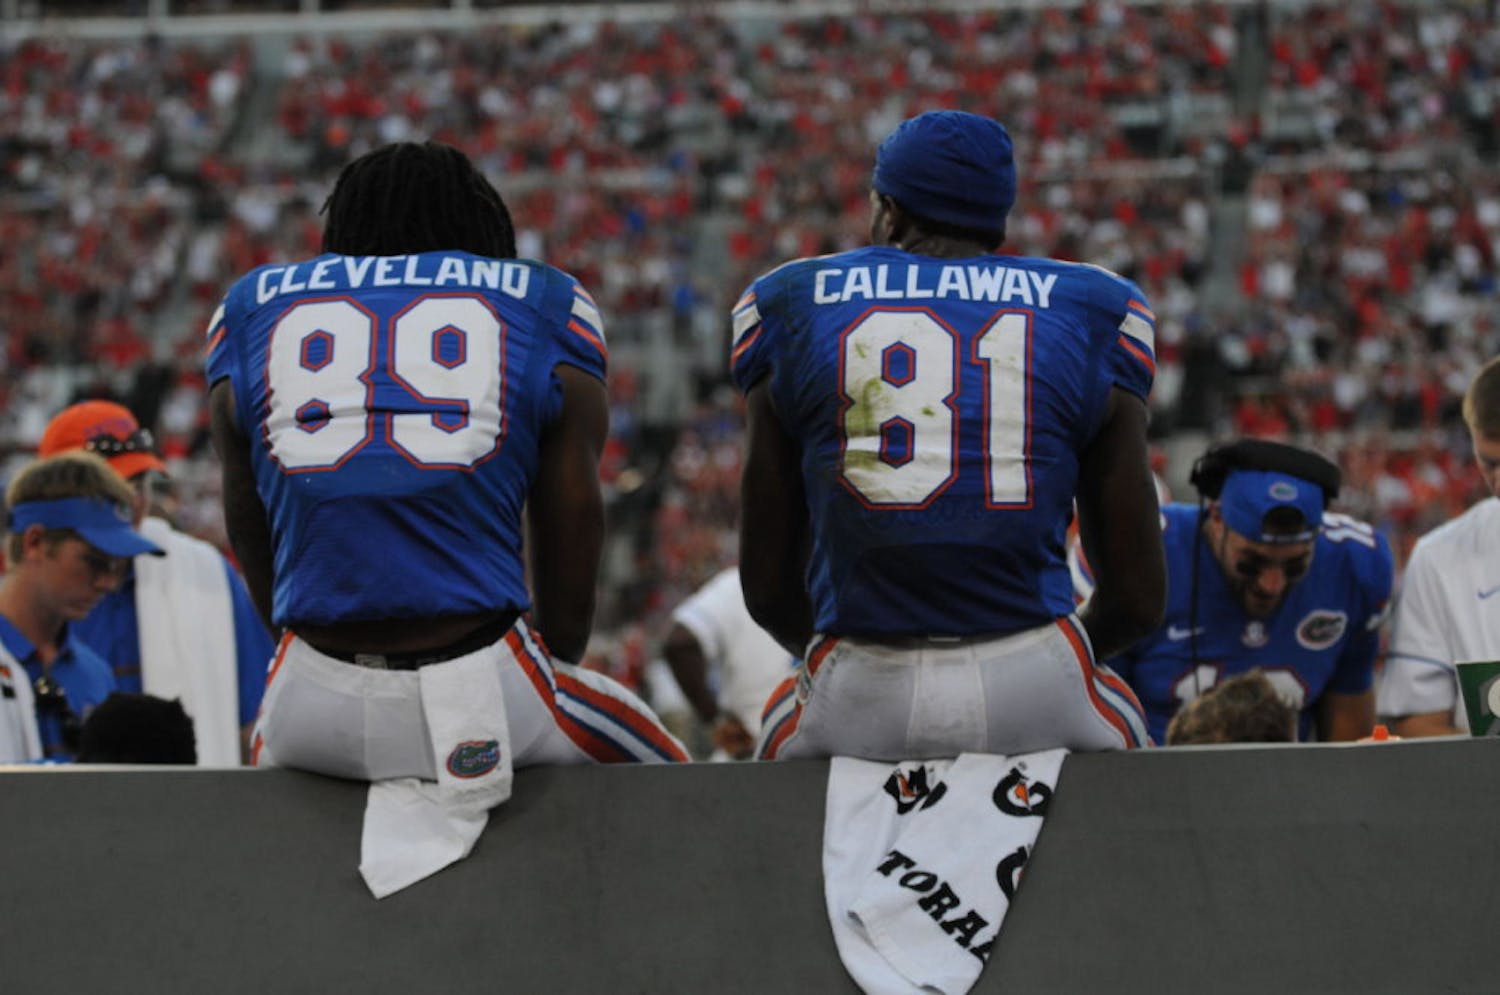 Antonio Callaway and Tyrie Cleveland sit on the sidelines during Florida's 24-10 win against Georgia on Oct. 29, 2016, at EverBank Field.